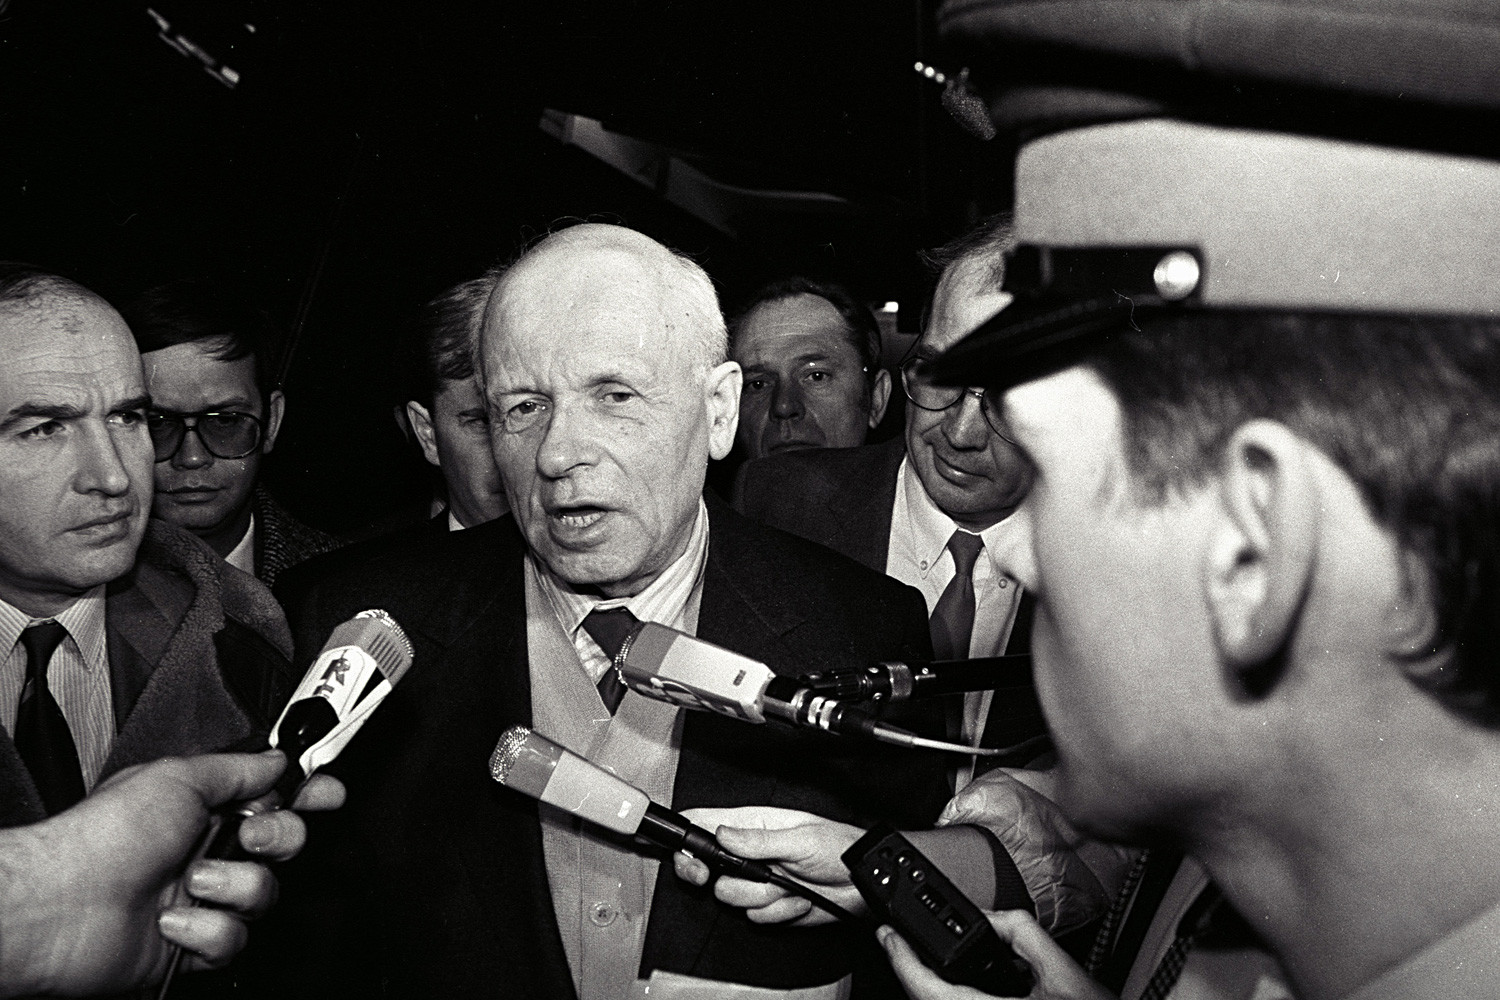 Andrei Sakharov arrives at Paris's Orly airport to participate in the ceremonies for the 40th anniversary of the United Nation's adoption of the universal declaration of human rights. (Dec. 9, 1988)